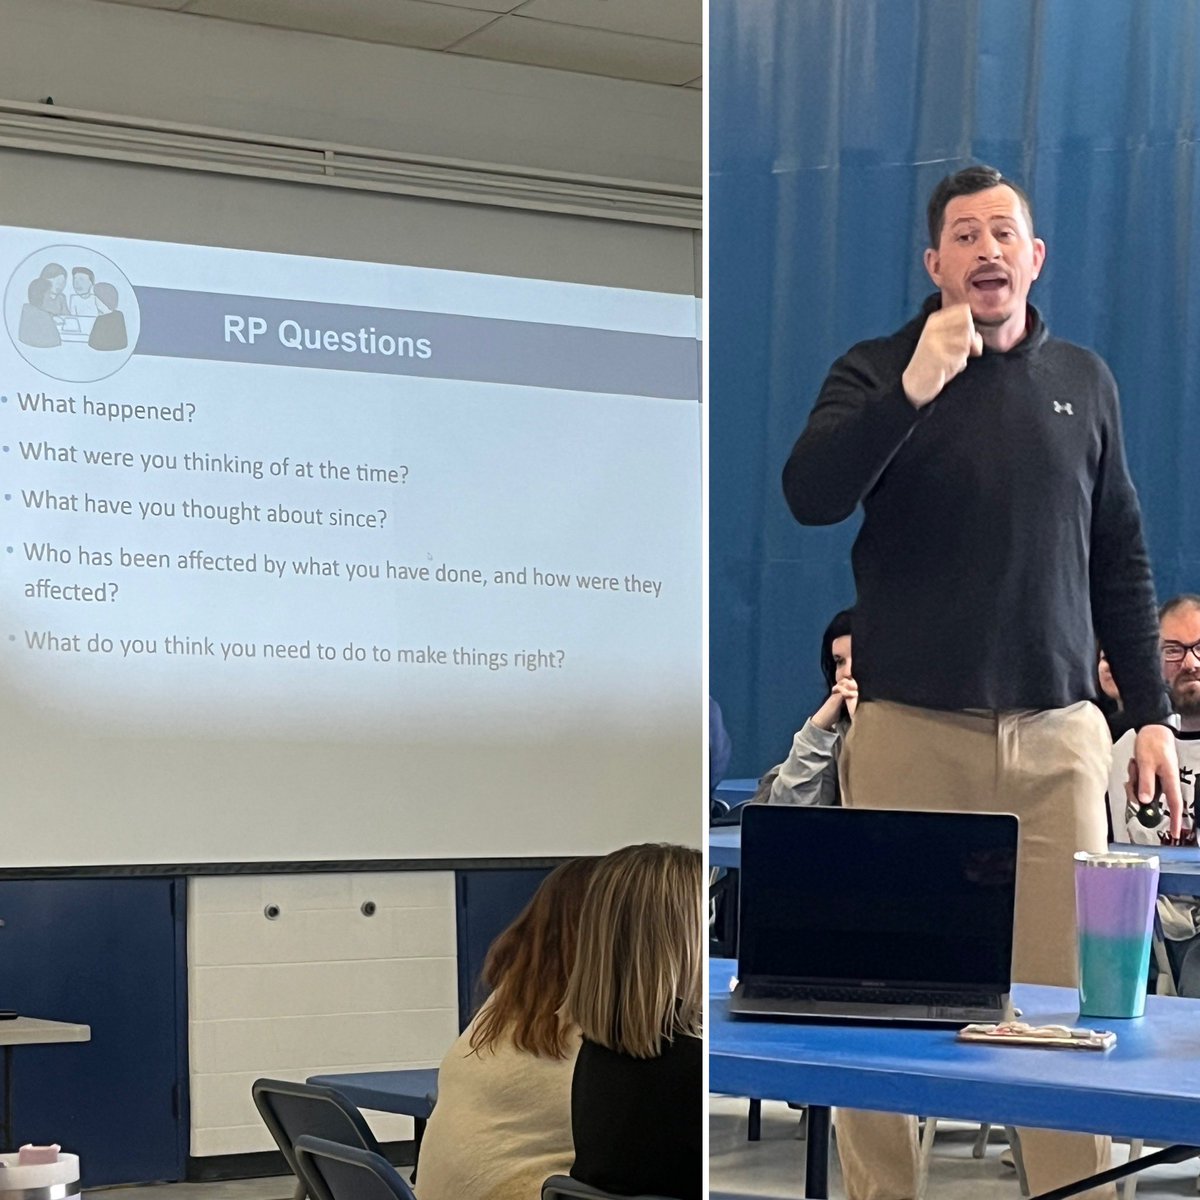 Thank you @jf_converse for the inspiring PD! HP is ready to reach their affective statements goals! 💙🐻💛 #beproactive #restorativepractices @HPCubs #wsdlearns #pd